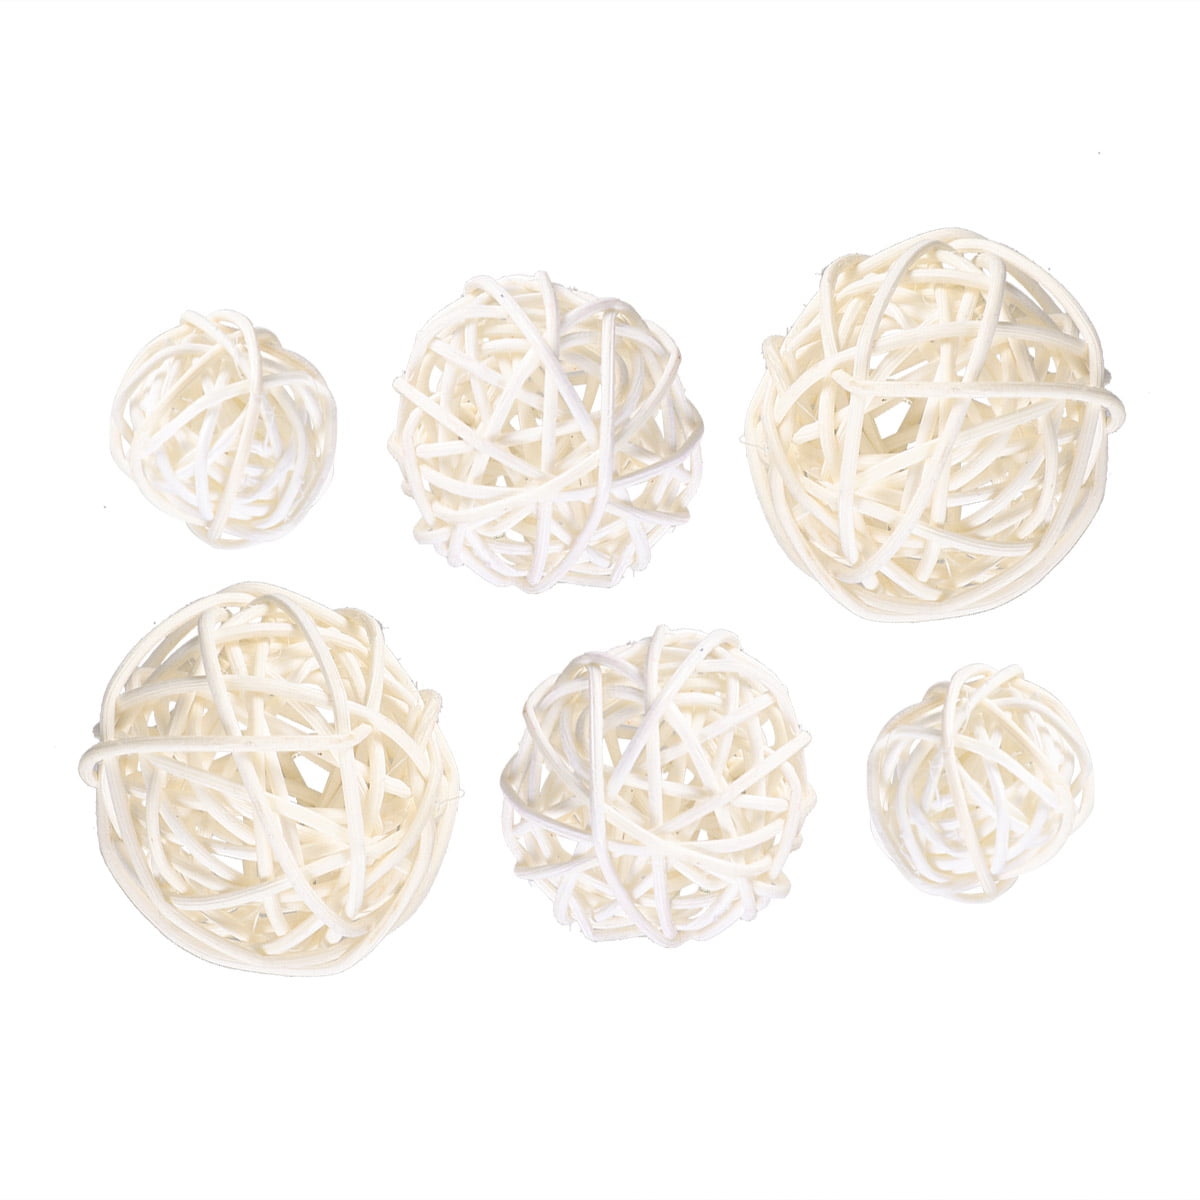 15pcs Rattan Wicker Ball Decorations Ornaments Wedding Christmas Party Table